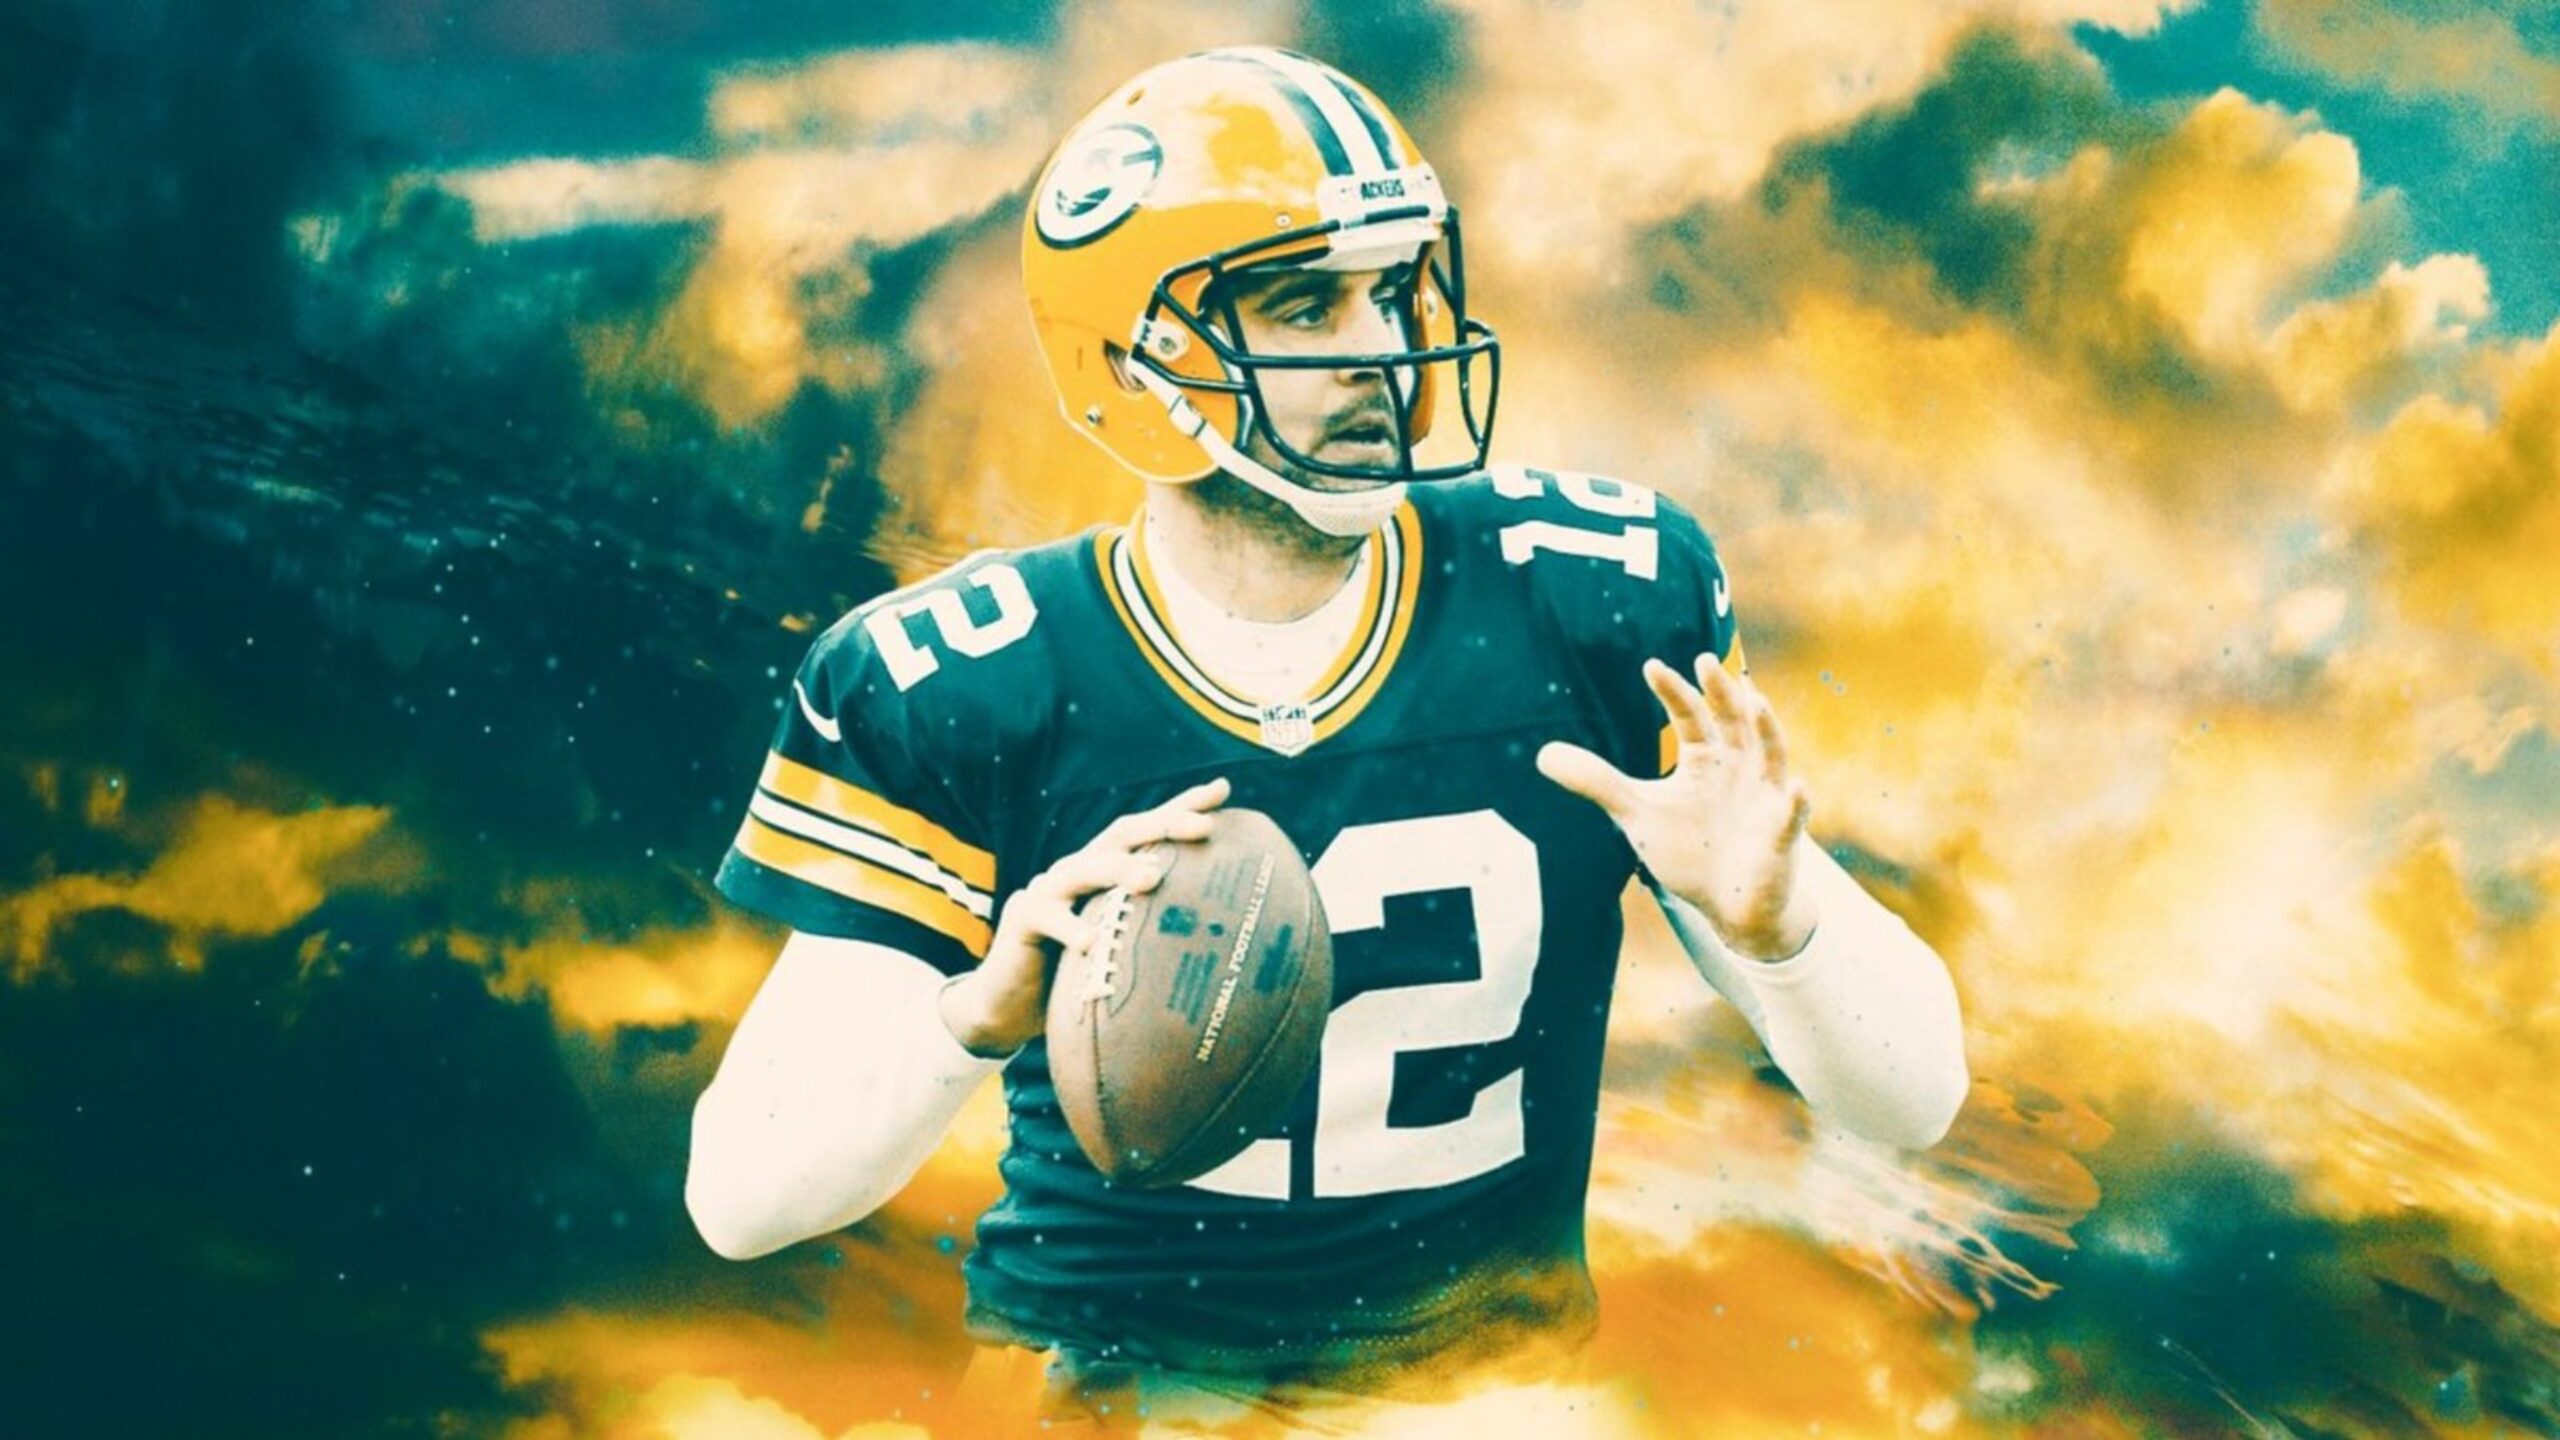 Aaron Rodgers Laptop Backgrounds